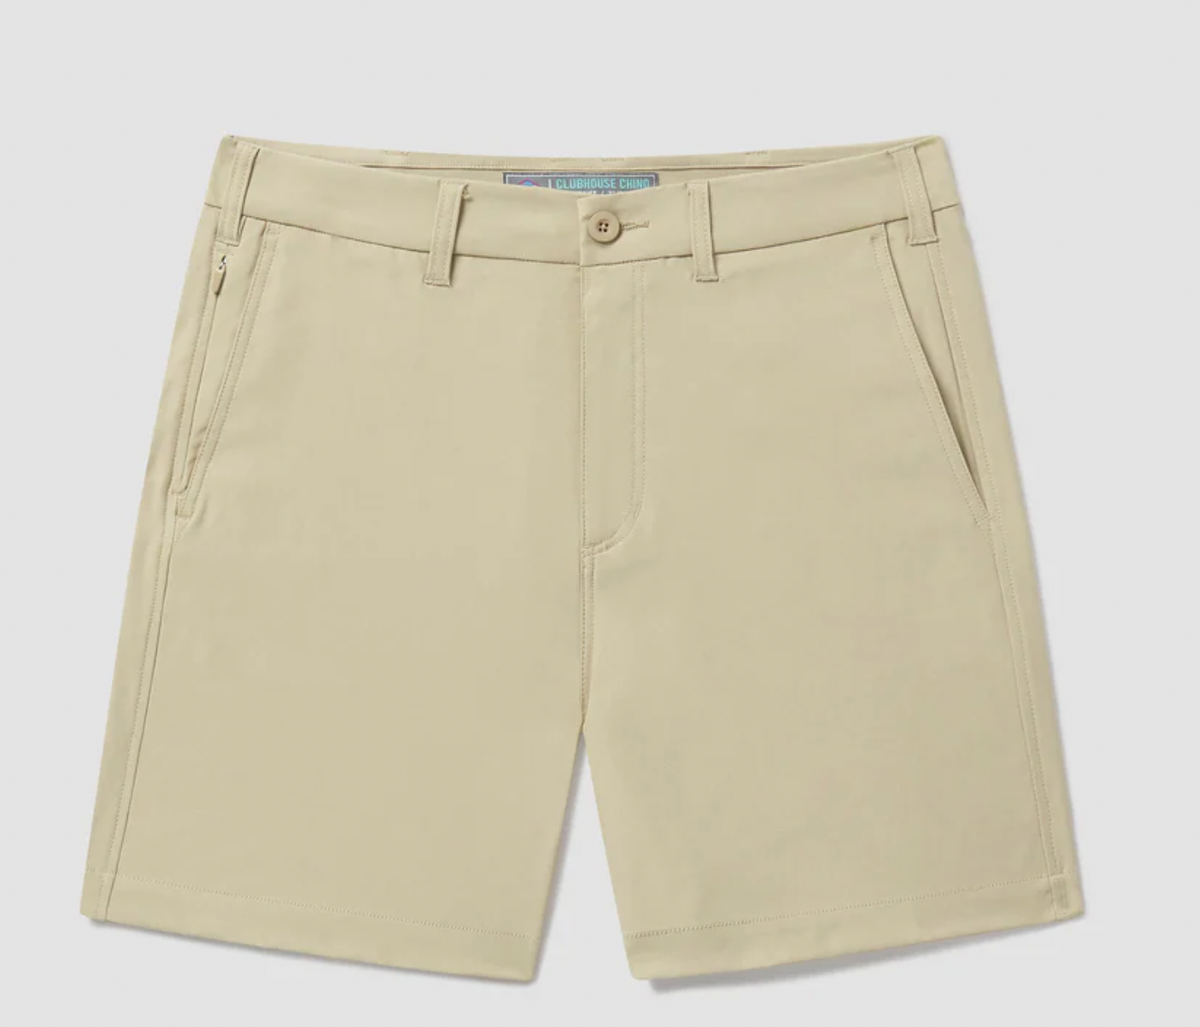 Southern Shirt Clubhouse Performance Chino Short